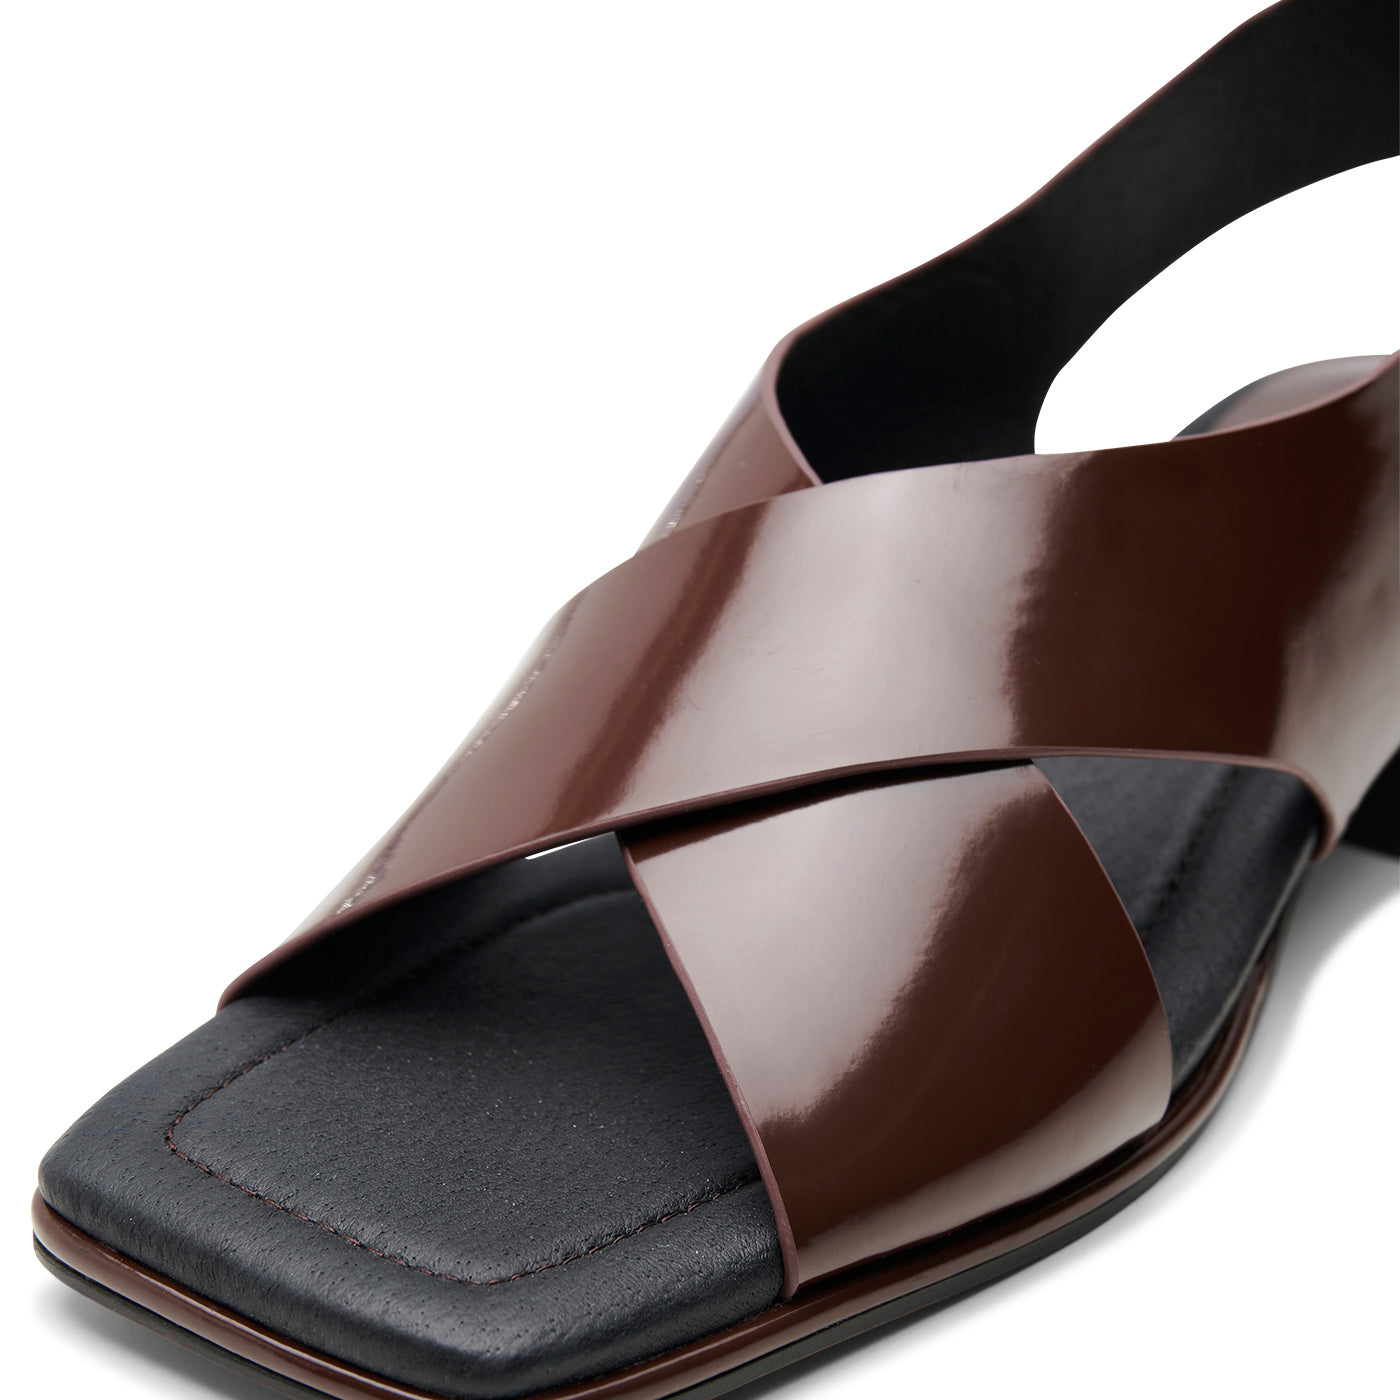 SHOE THE BEAR WOMENS Colette sandal leather Sandals 130 BROWN